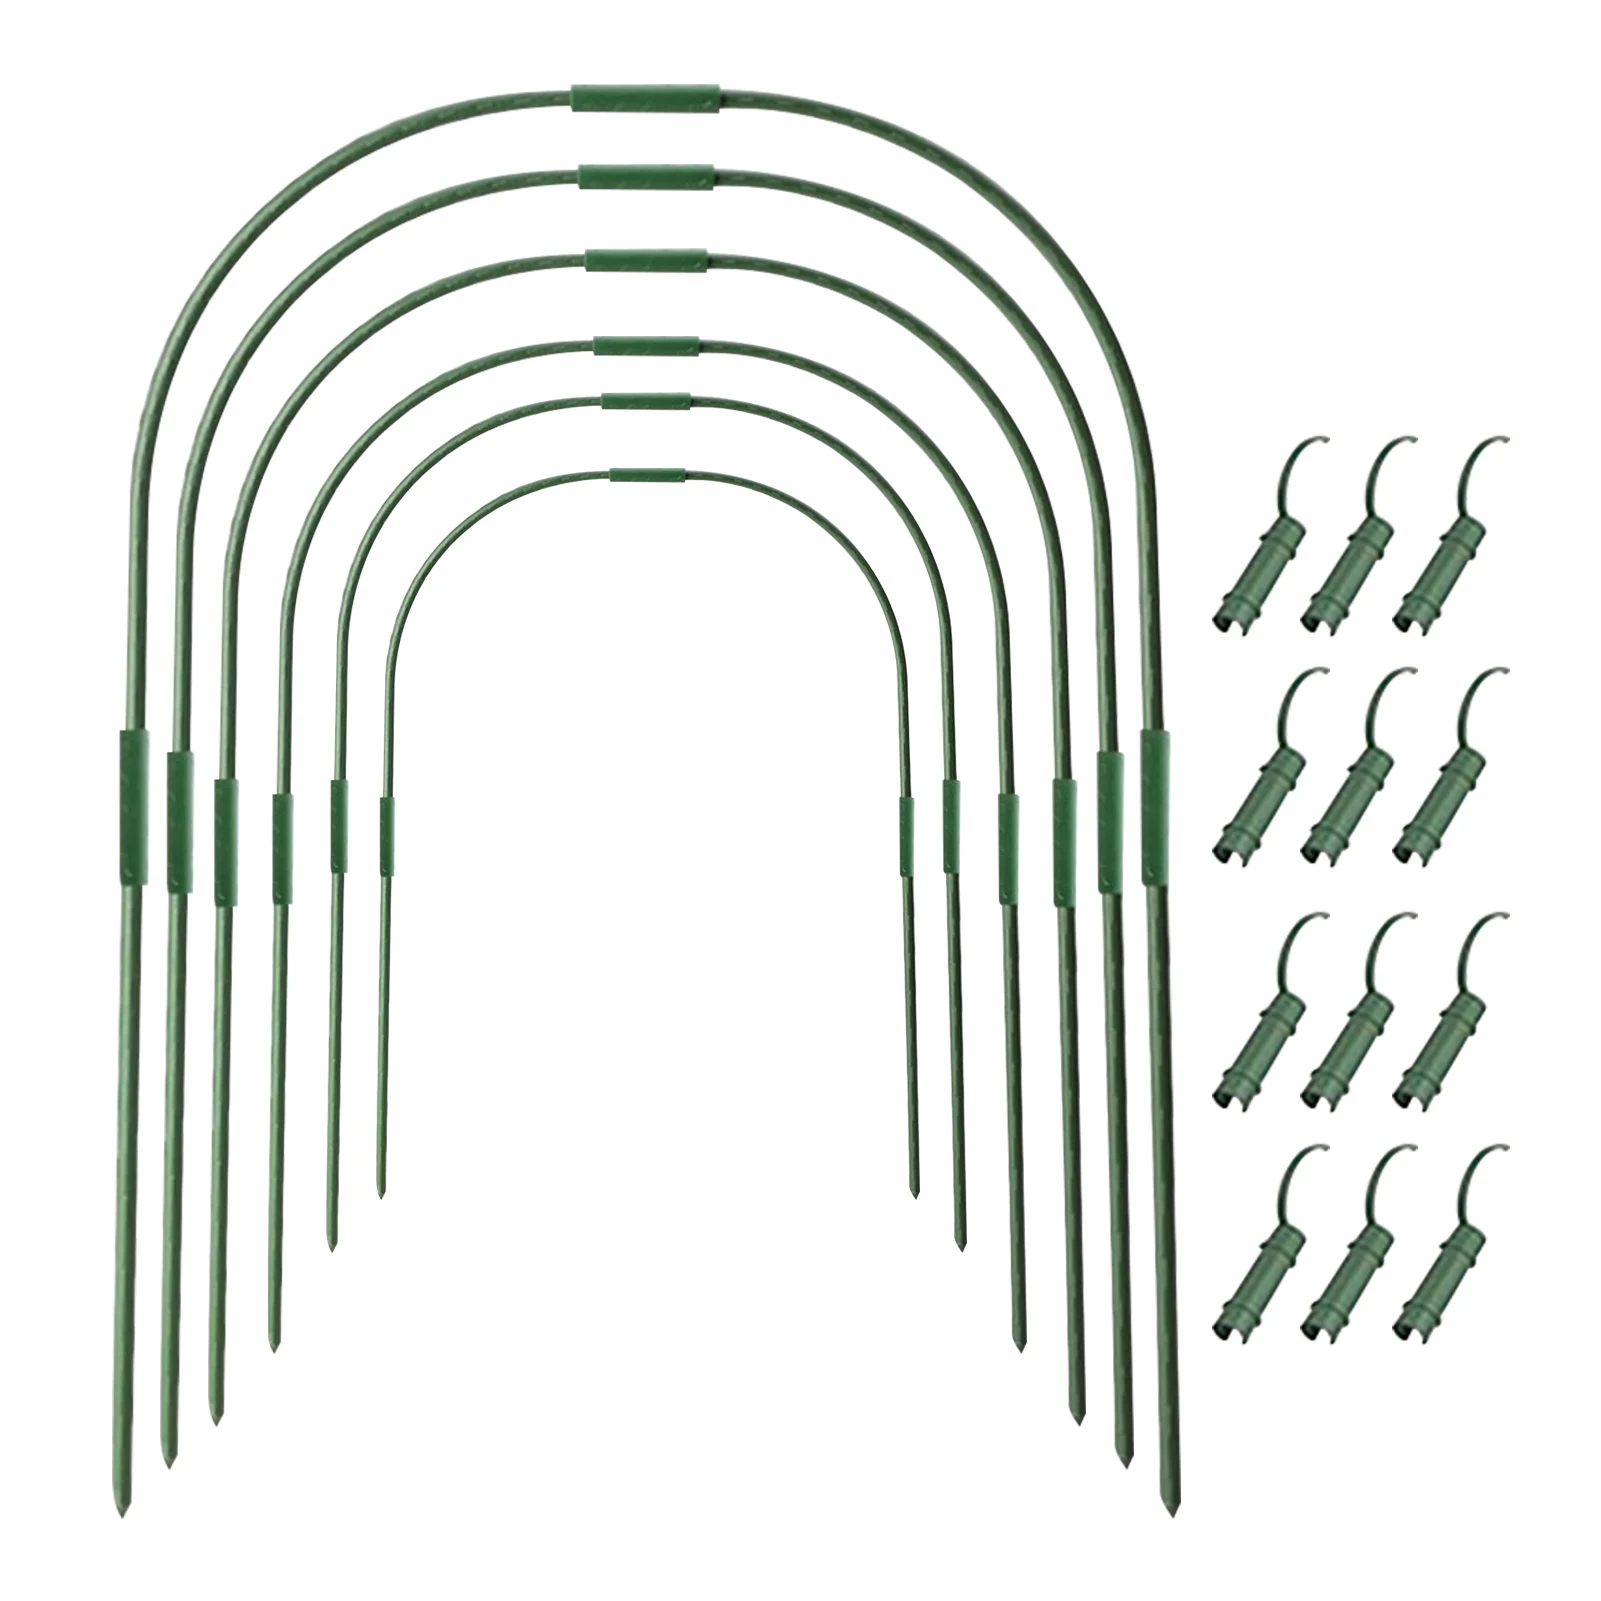 

54pcs Tunnel Growing DIY Protective Plant Support Row Cover Clip Steel Greenhouse Hoop Set Frame Vegetable Stakes Connector